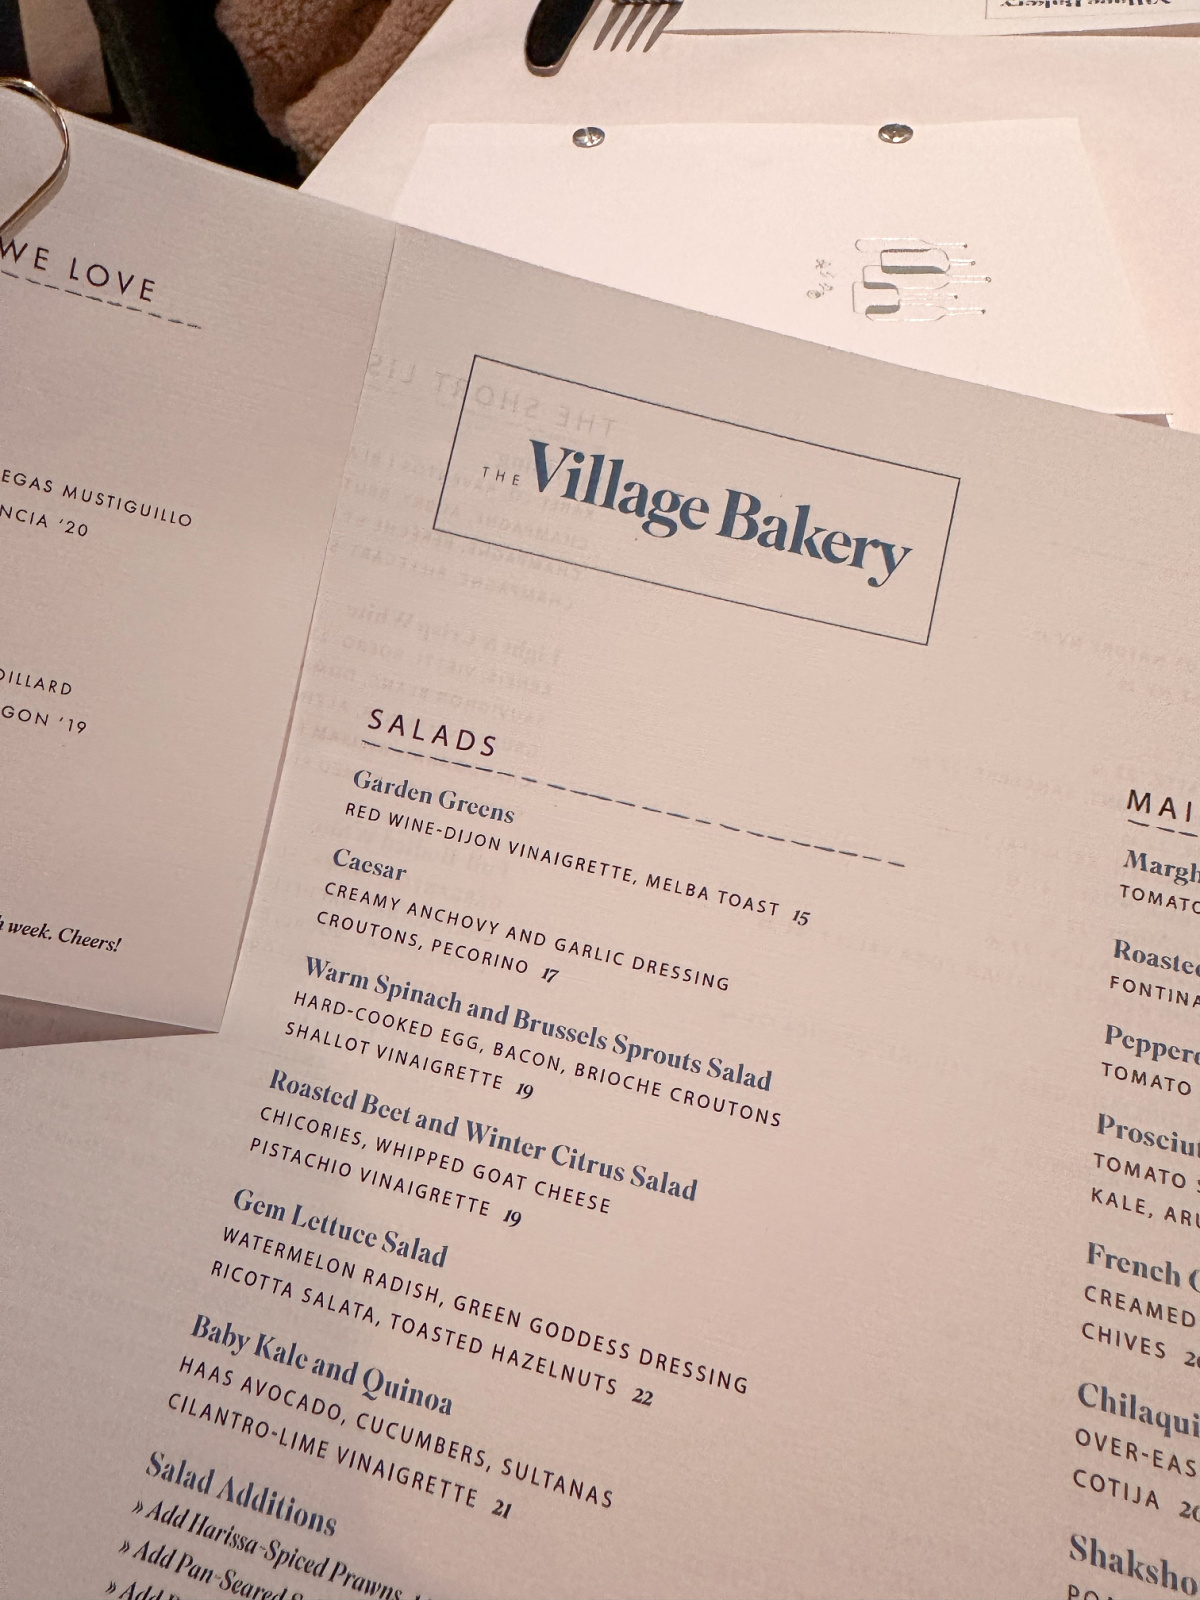 Lunch menu at The Village Bakery.